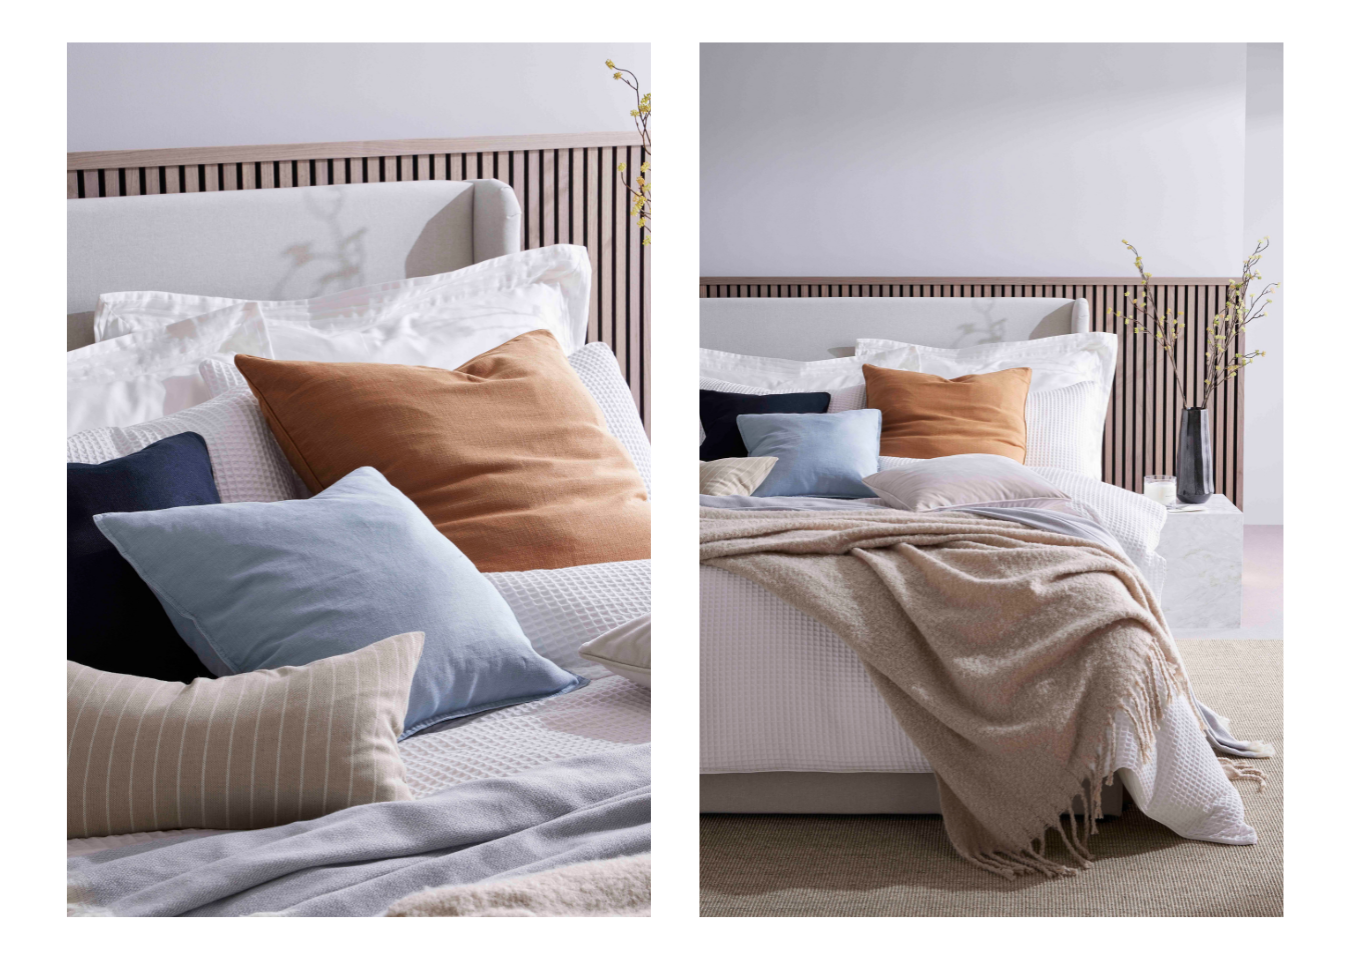 Left: blue, orange and beige cushions on white bedding. Right: SlatWall Midi Walnut behind a bed with cushions and a blanket.